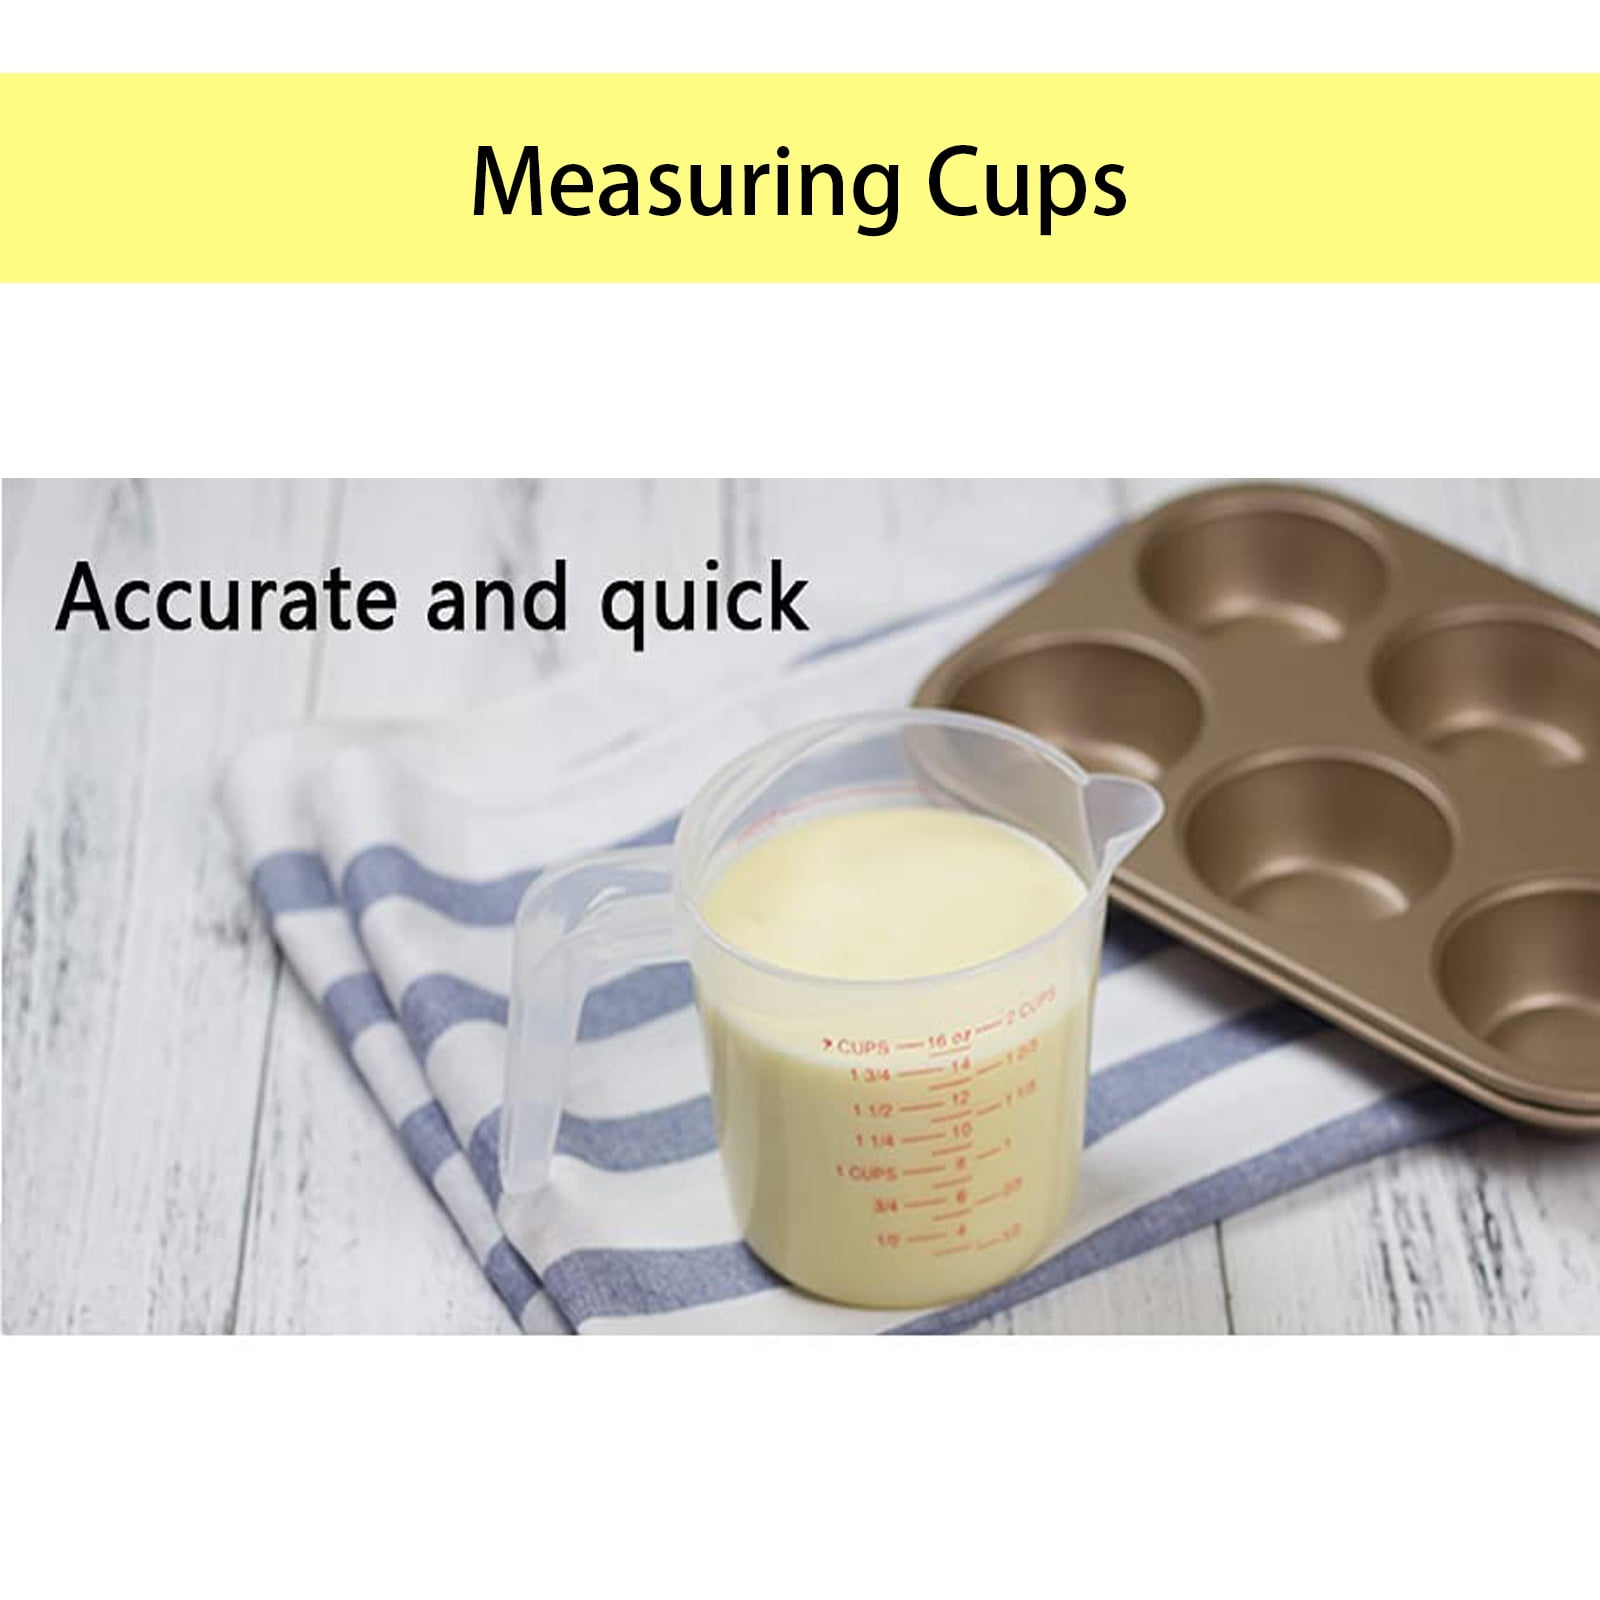 4-Cup Plastic Measuring Cup, OZ, Millimeter FREE Shipping in Box not Mailer